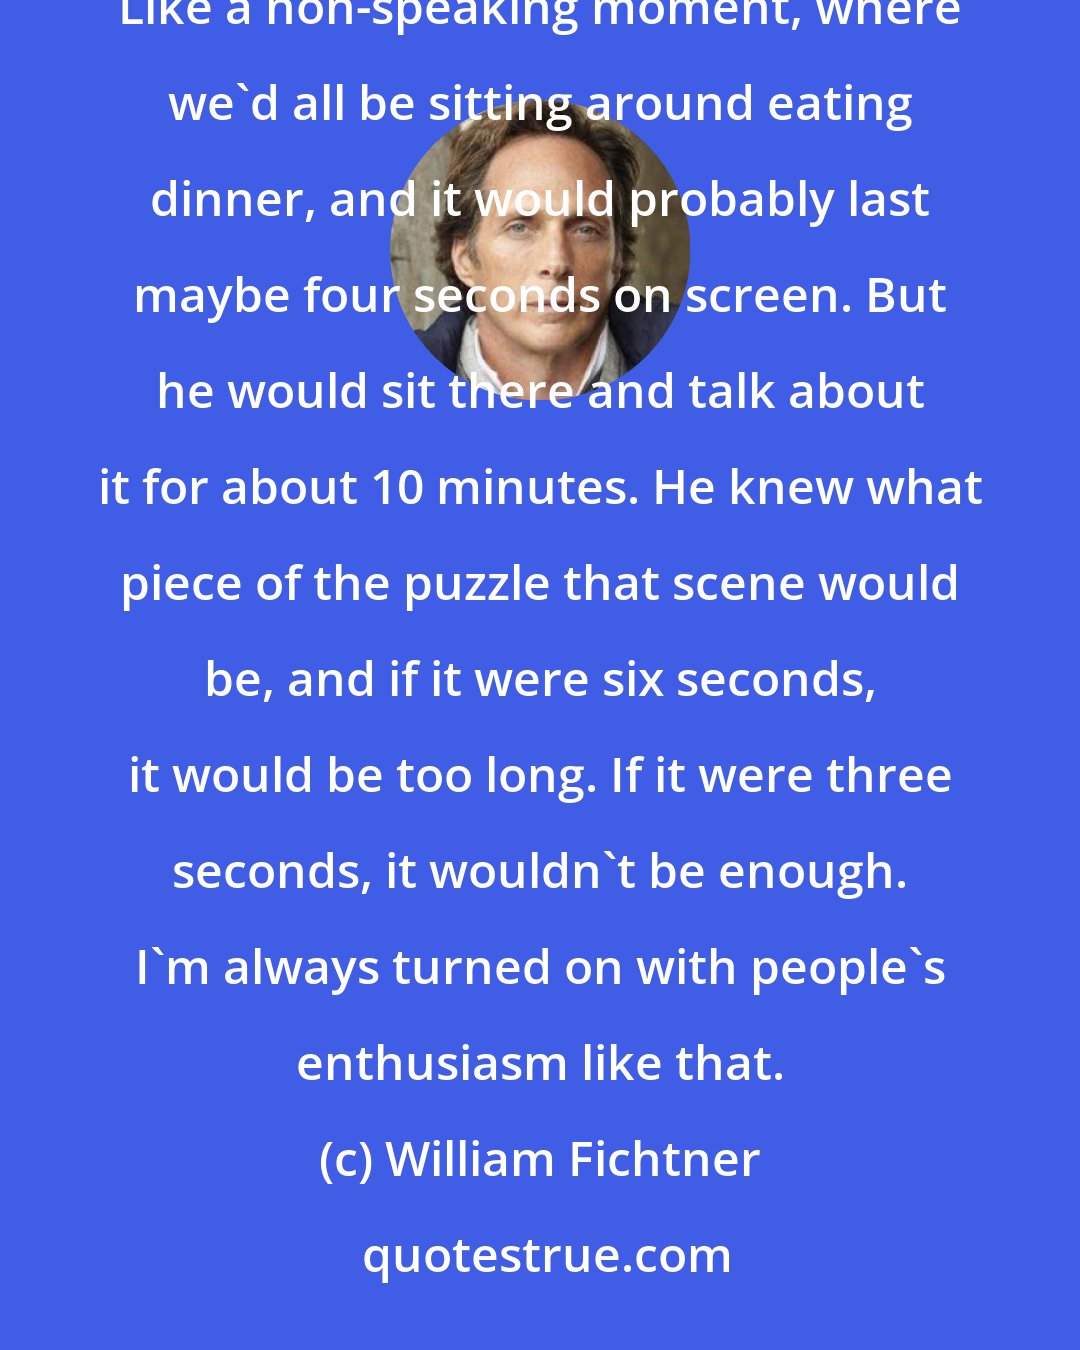 William Fichtner: We worked on The Perfect Storm, and I'll never forget, Wolfgang Petersen would talk about a moment. Like a non-speaking moment, where we'd all be sitting around eating dinner, and it would probably last maybe four seconds on screen. But he would sit there and talk about it for about 10 minutes. He knew what piece of the puzzle that scene would be, and if it were six seconds, it would be too long. If it were three seconds, it wouldn't be enough. I'm always turned on with people's enthusiasm like that.